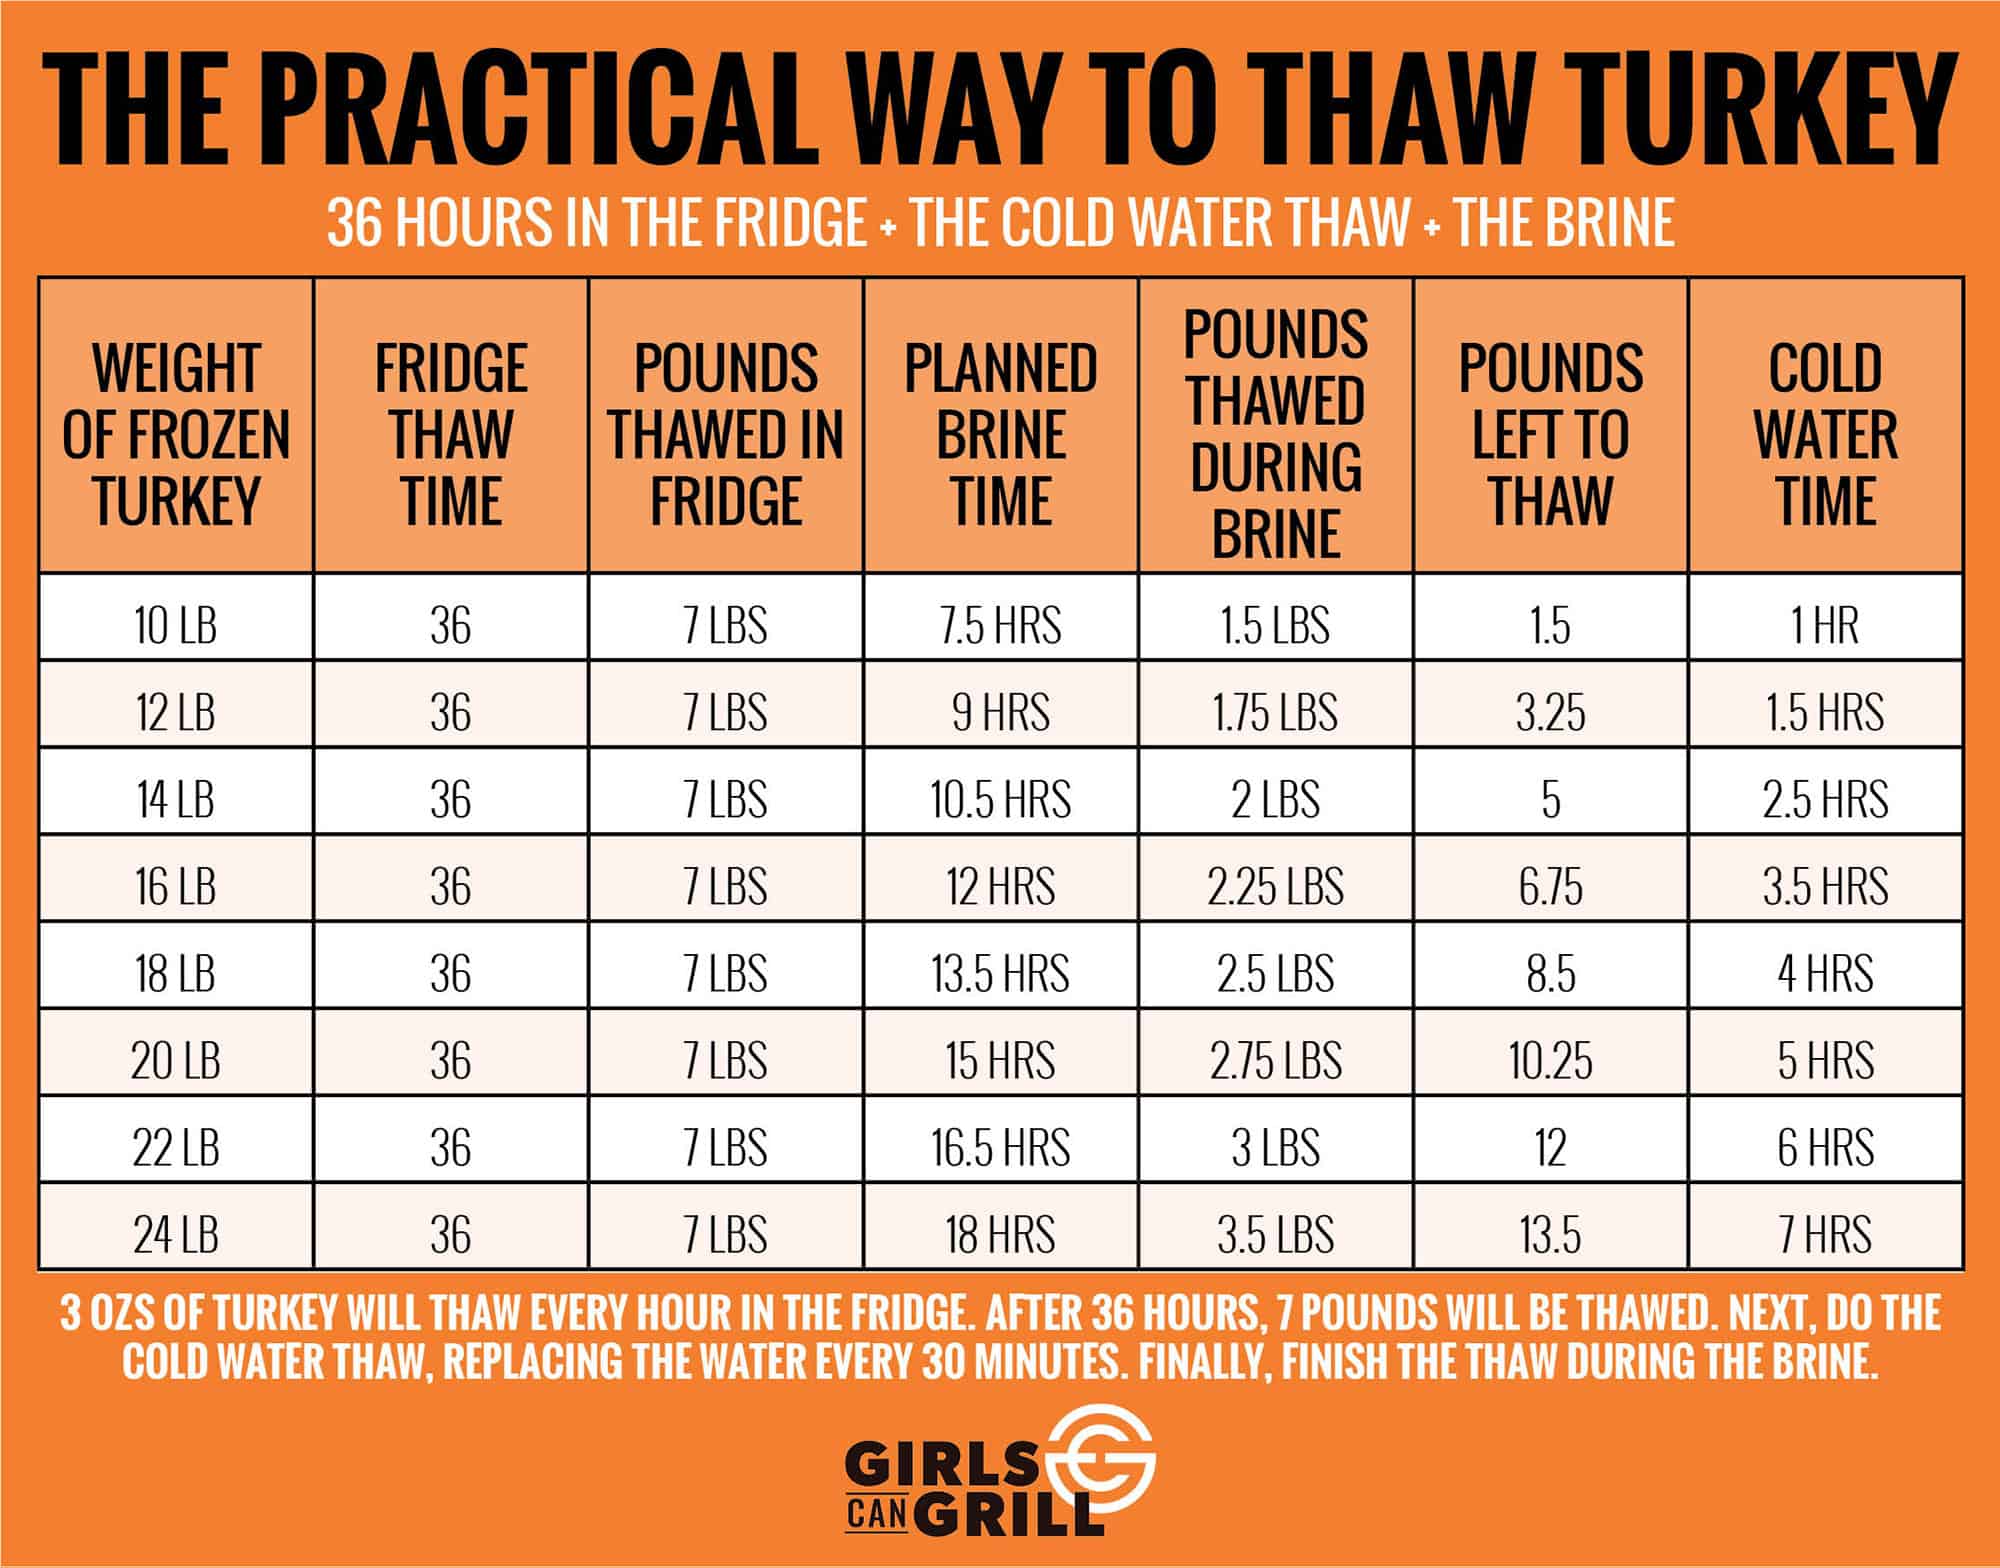 chart showing thaw times for fridge, brine and cold water